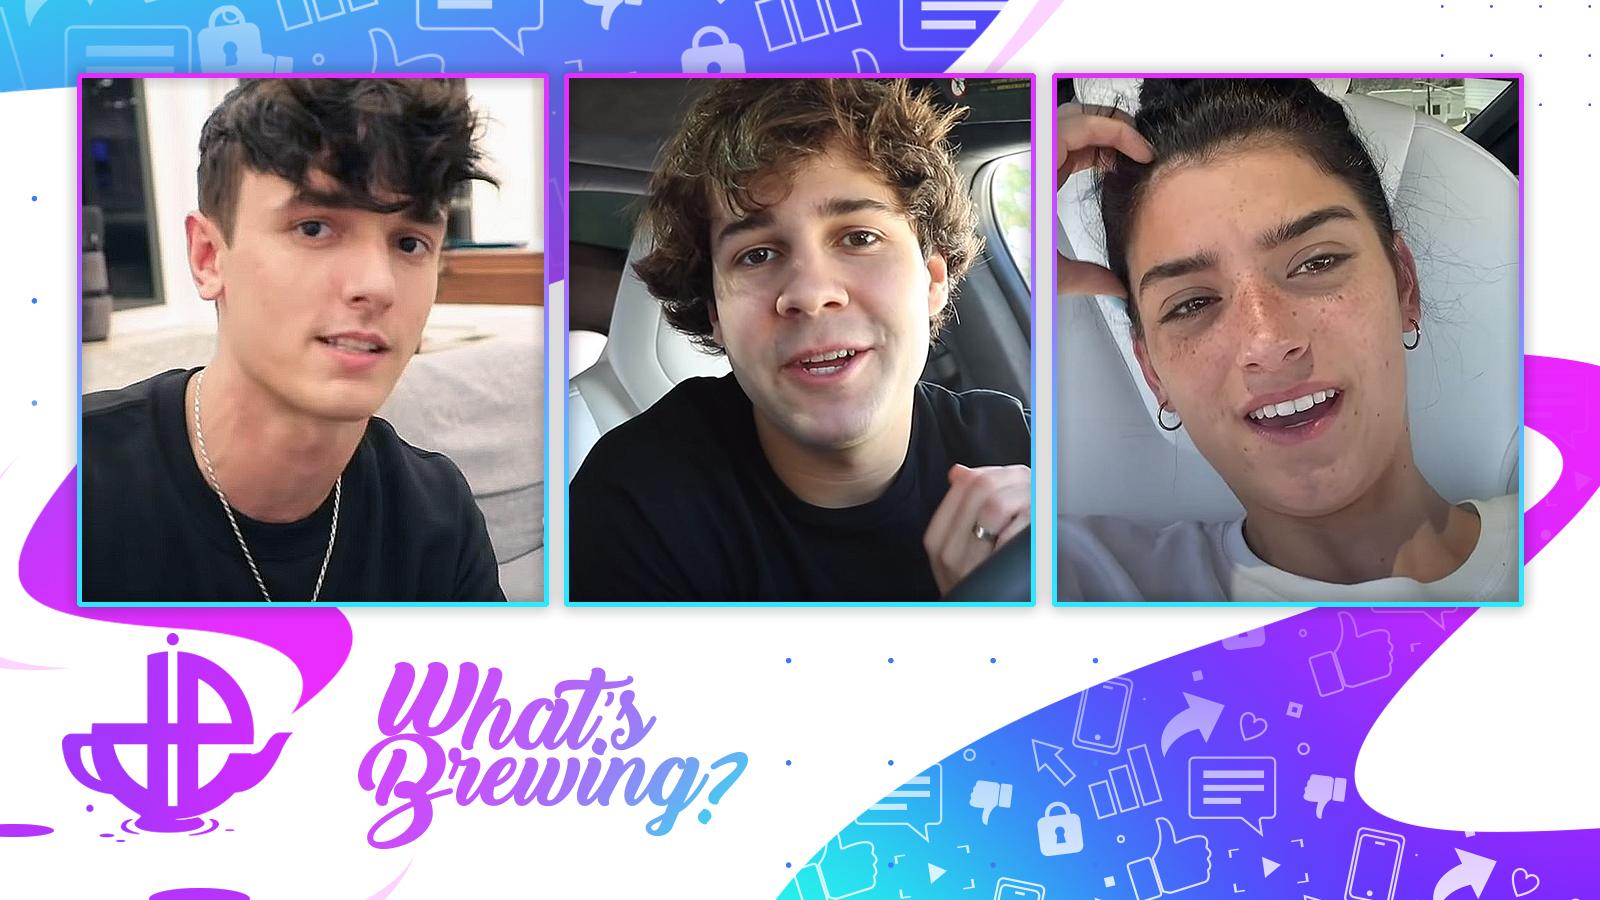 Bryce Hall, David Dobrik and Dixie D'Amelio are pictured on the What's Brewing logo.